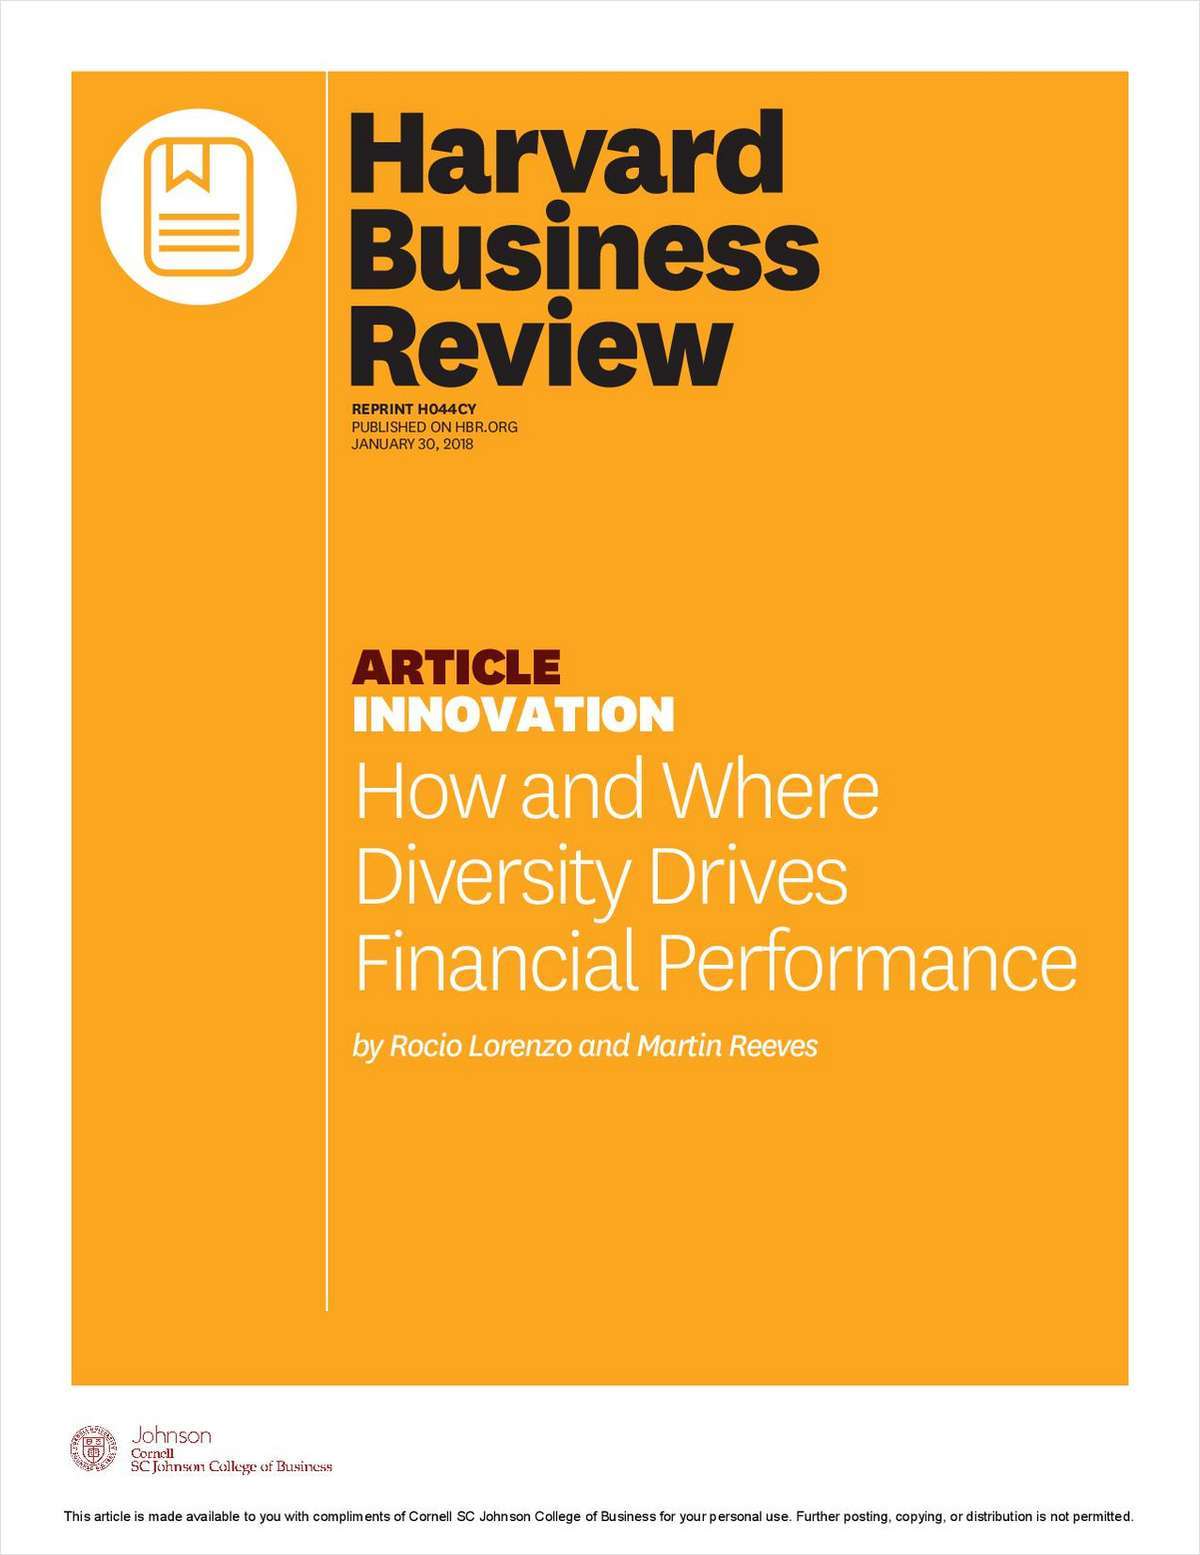 How and Where Diversity Drives Financial Performance